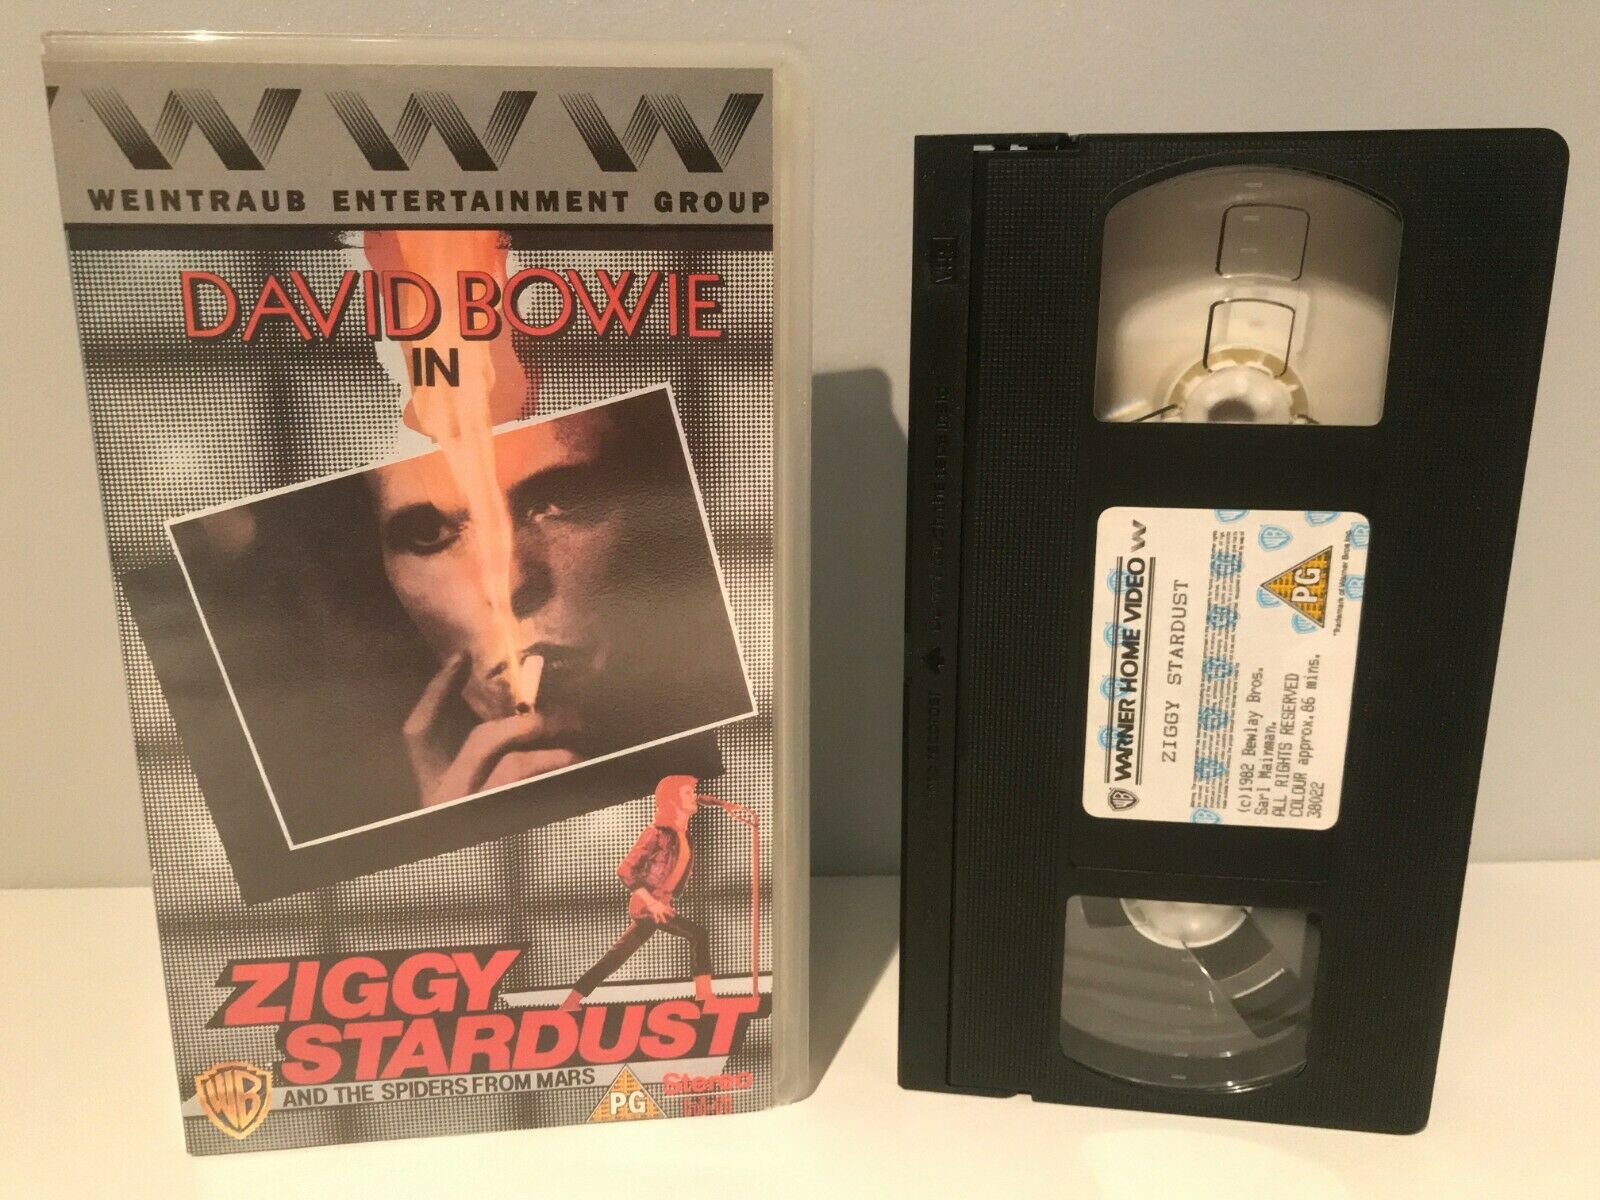 Ziggy Stardust And The Spiders From Mars [David Bowie] Documentary - Music - VHS-